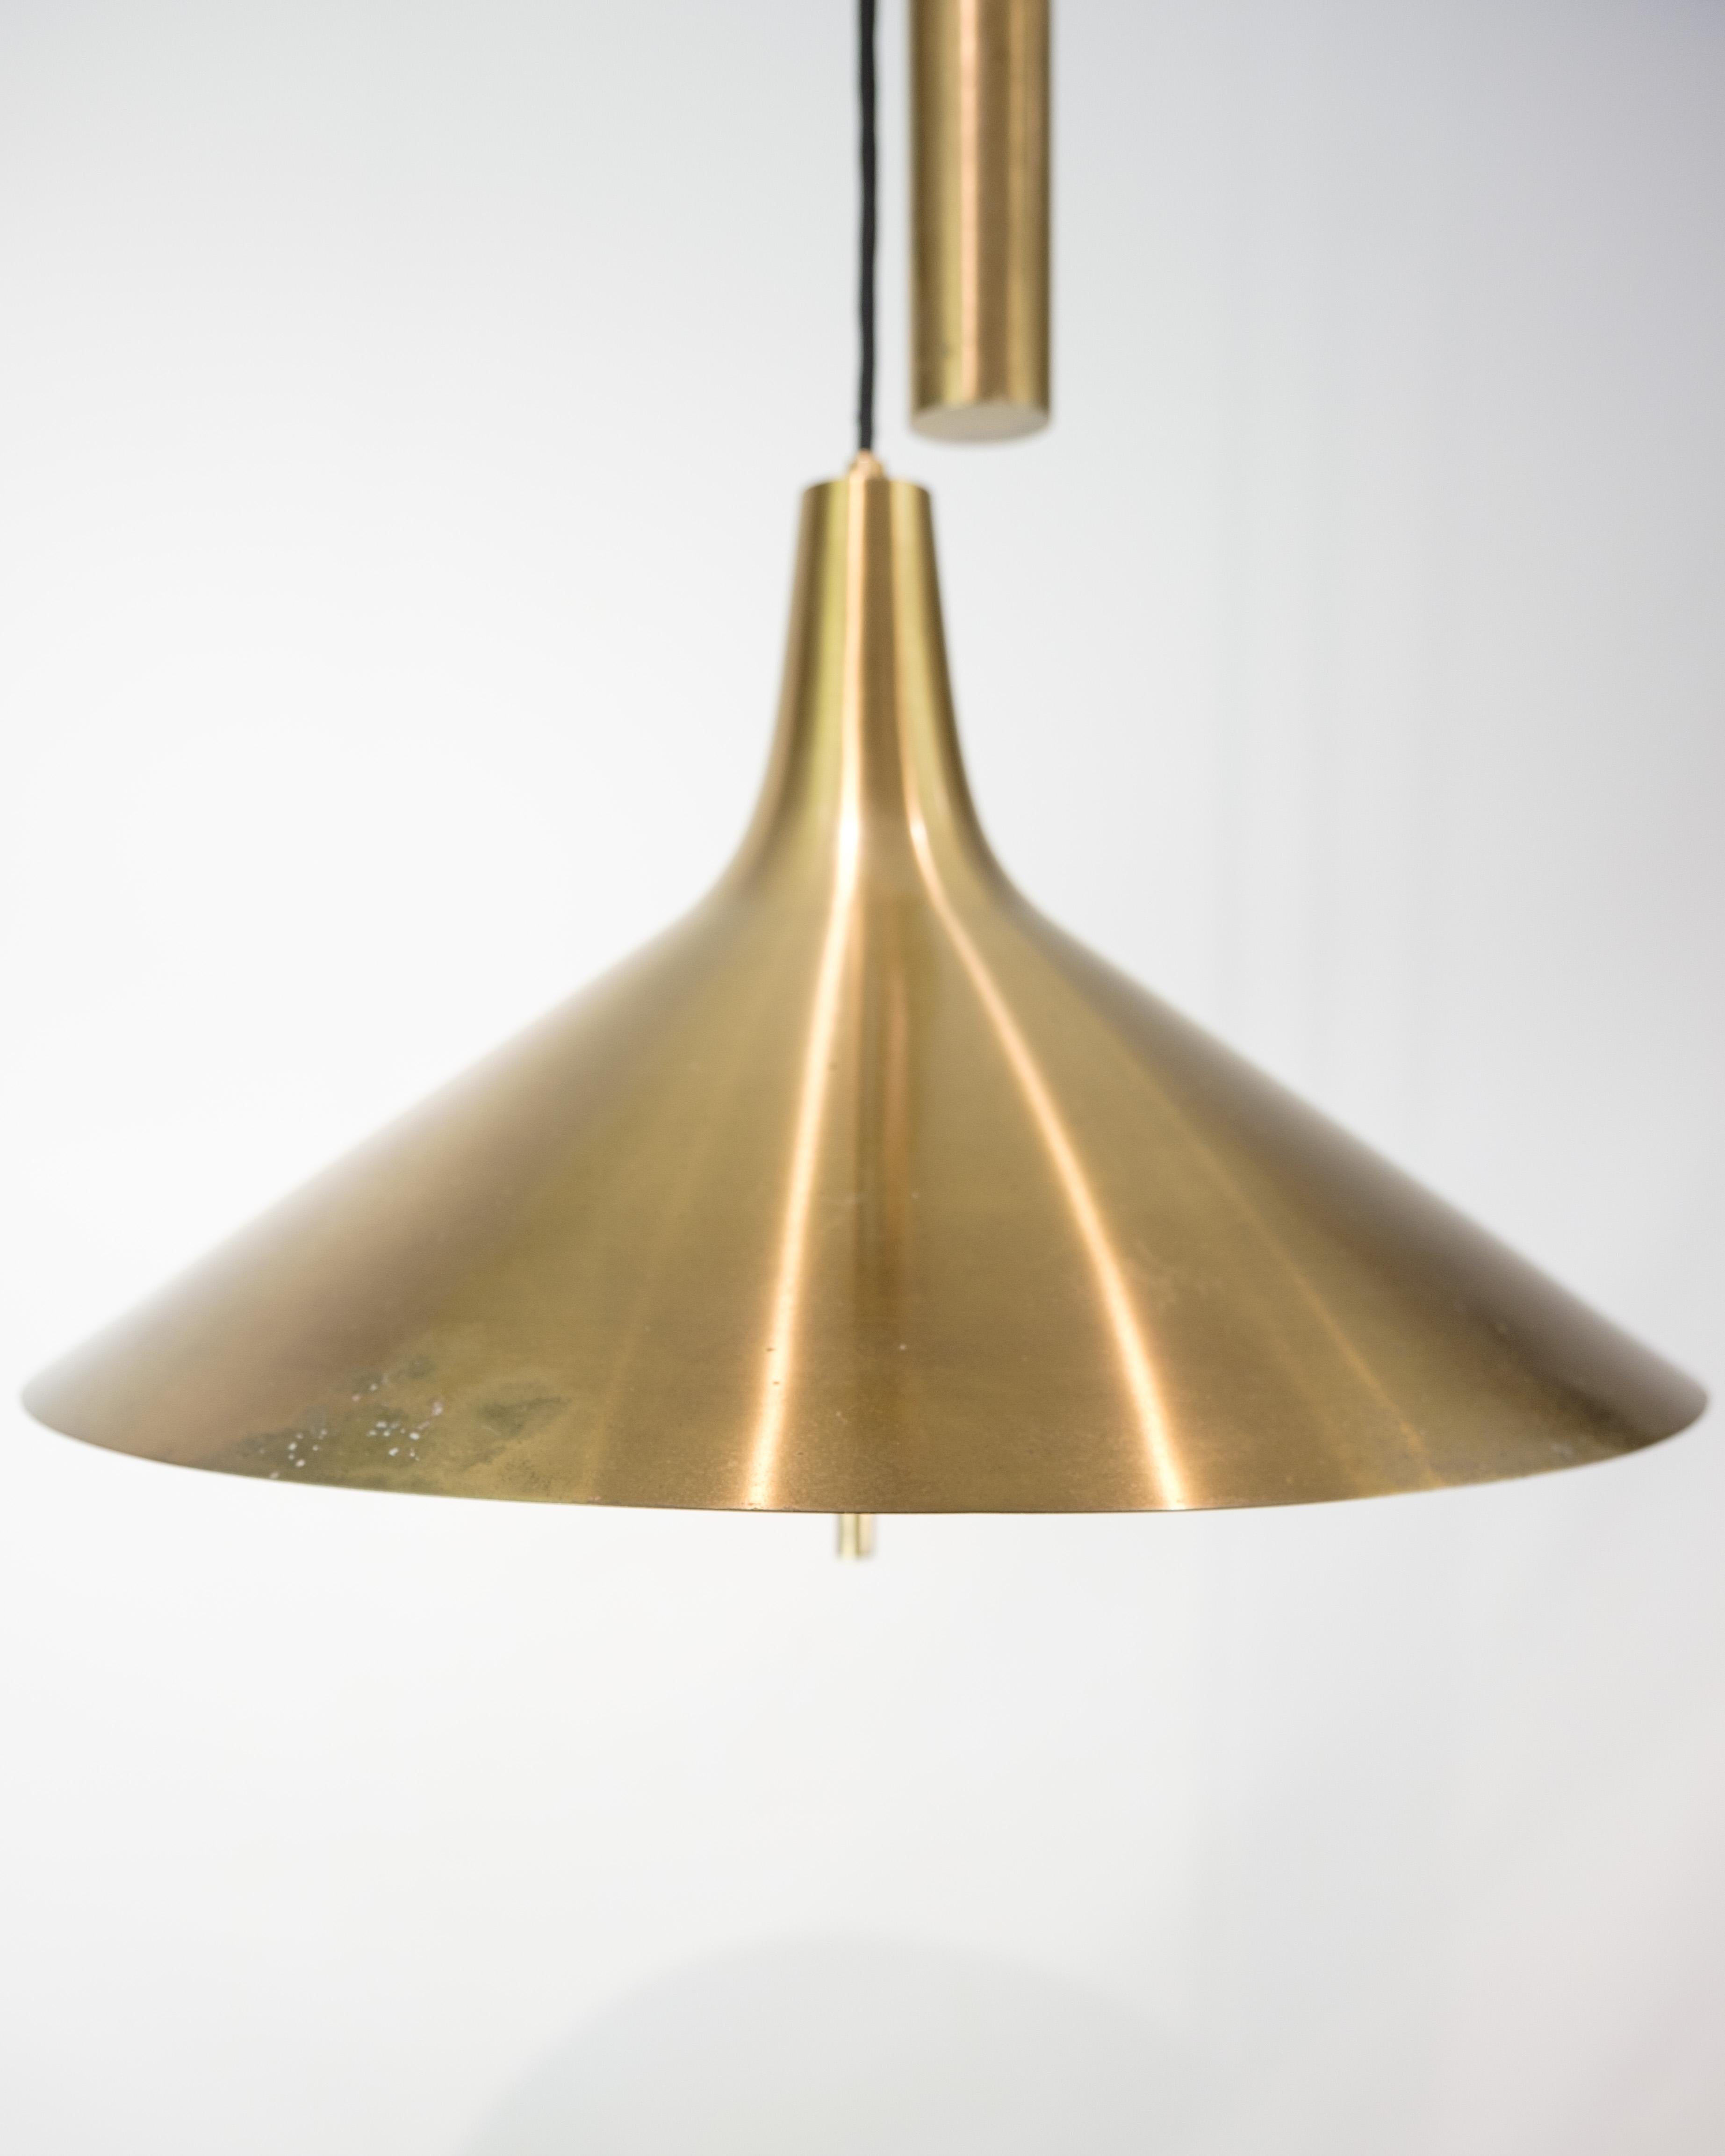 Mid-Century Modern Ceiling lamp In Brass With a Counterweight Pendant, Made by Lyfa From 1960s For Sale